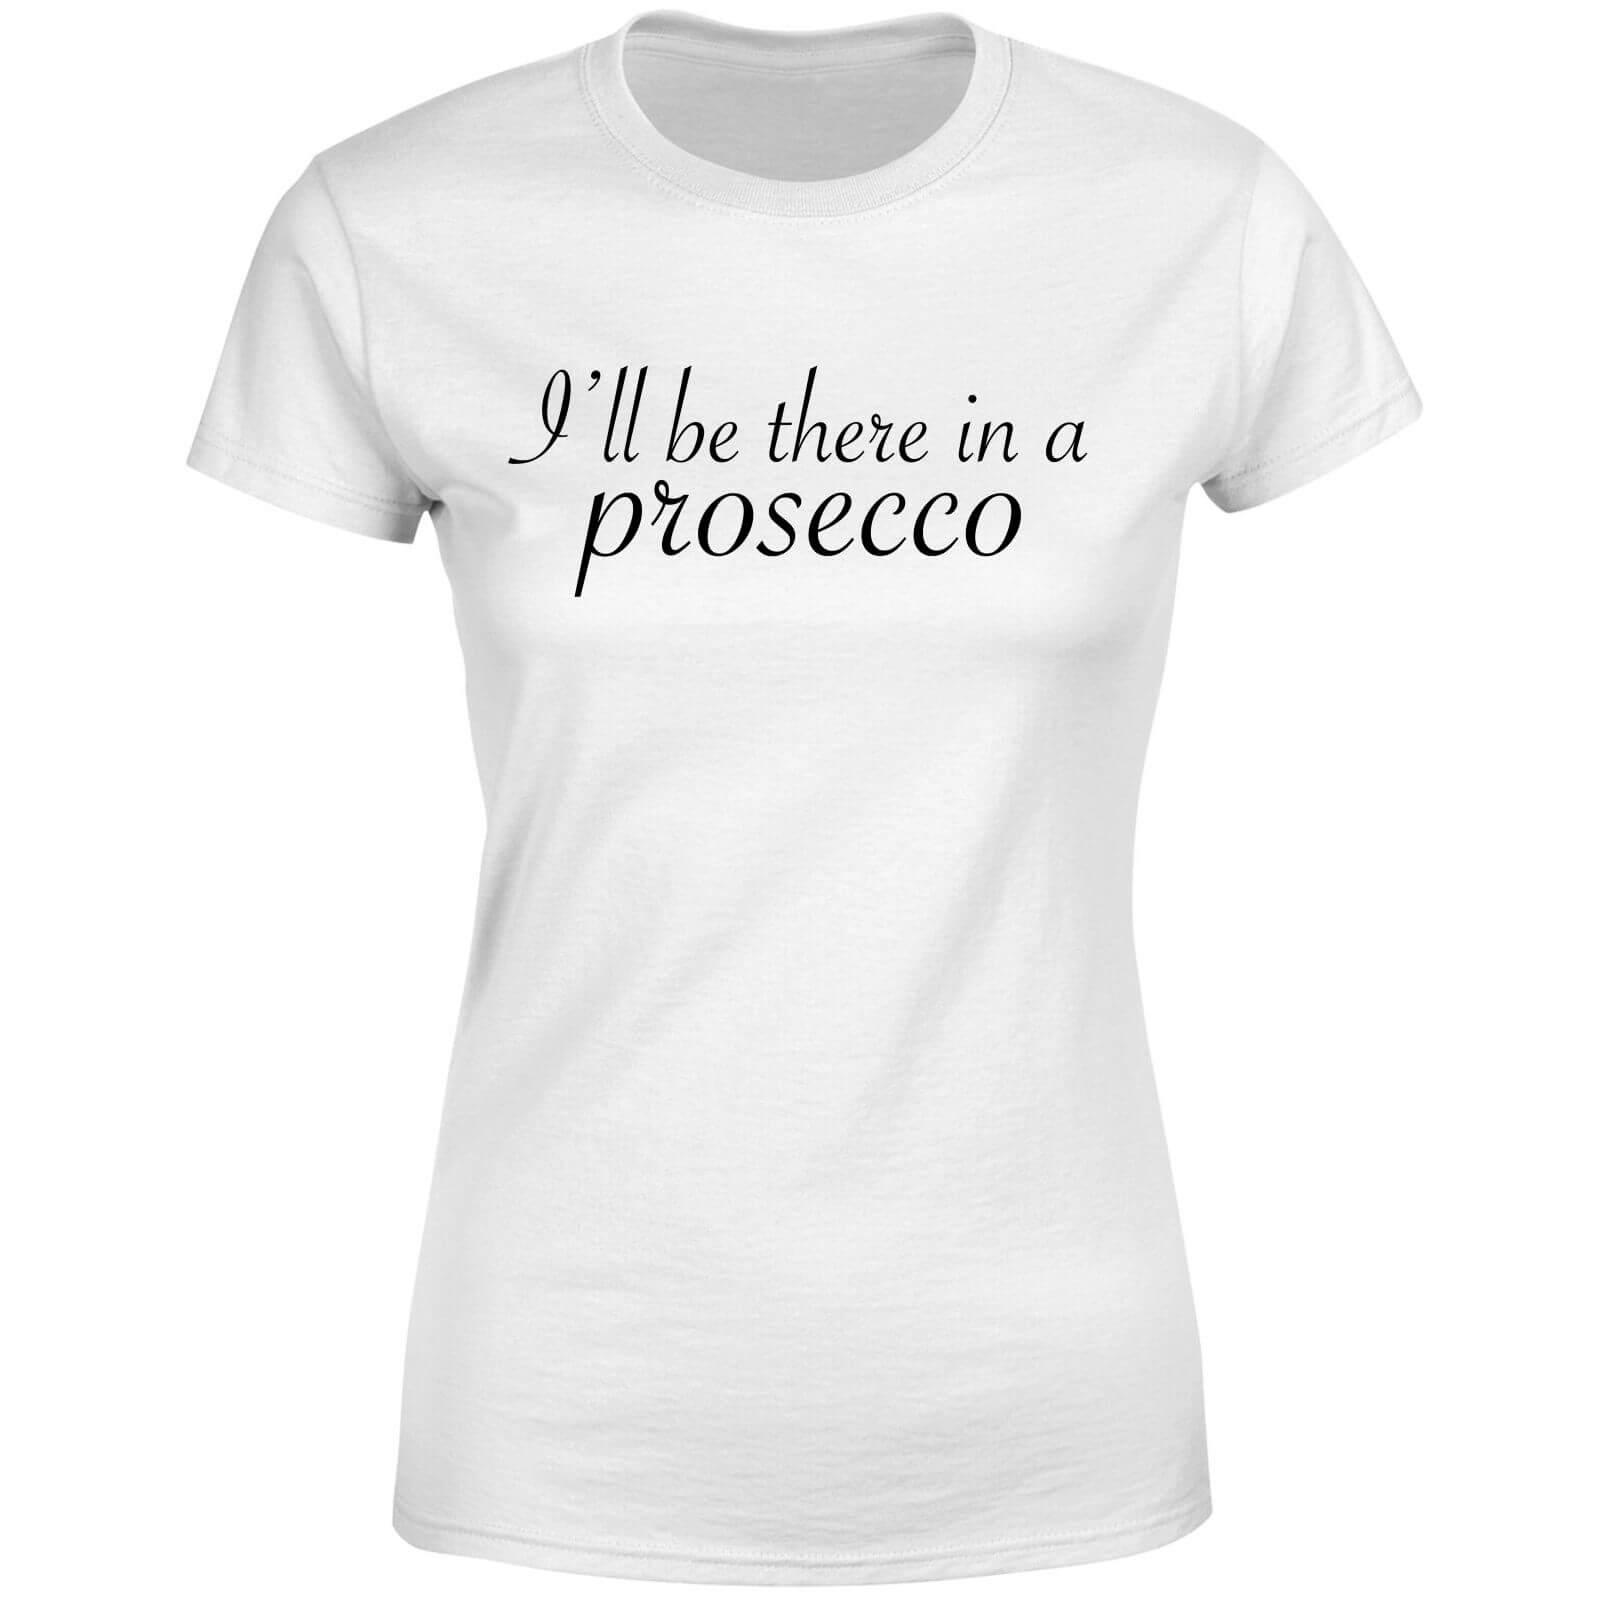 I'll be there in a Prosecco Women's T-Shirt - White - S - White